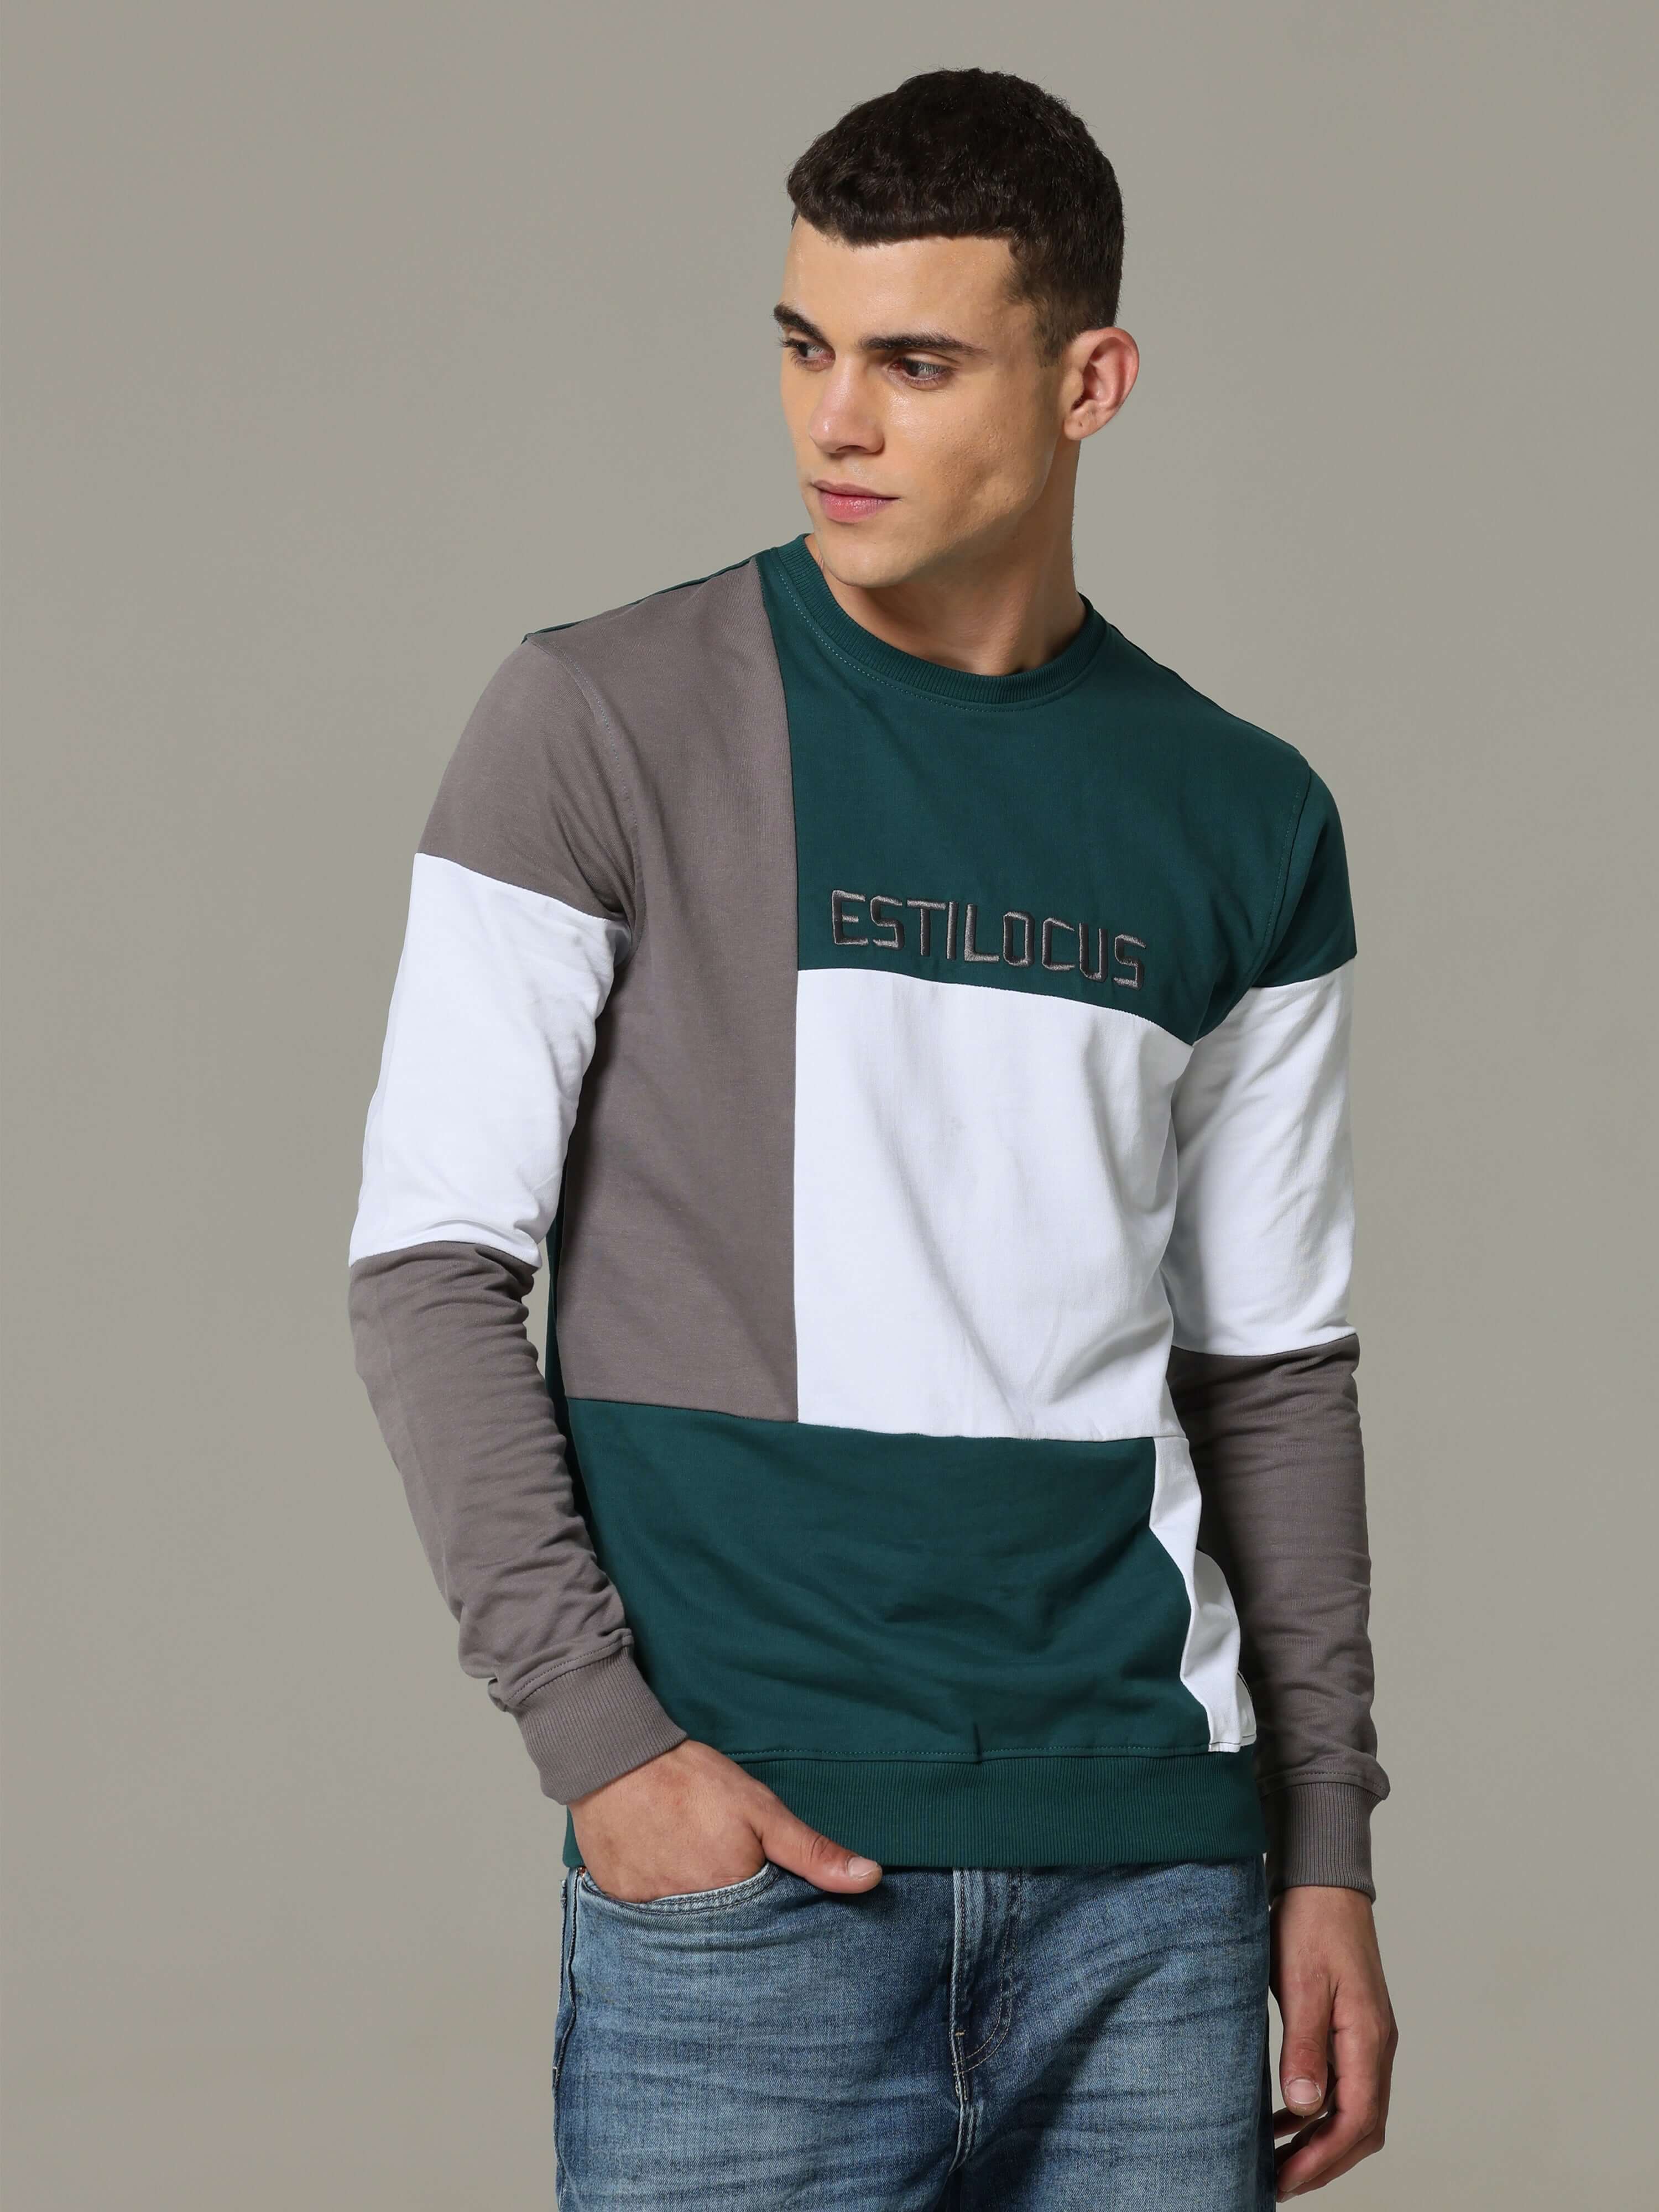 Patterned Crew Neck Teal Sweat Shirt